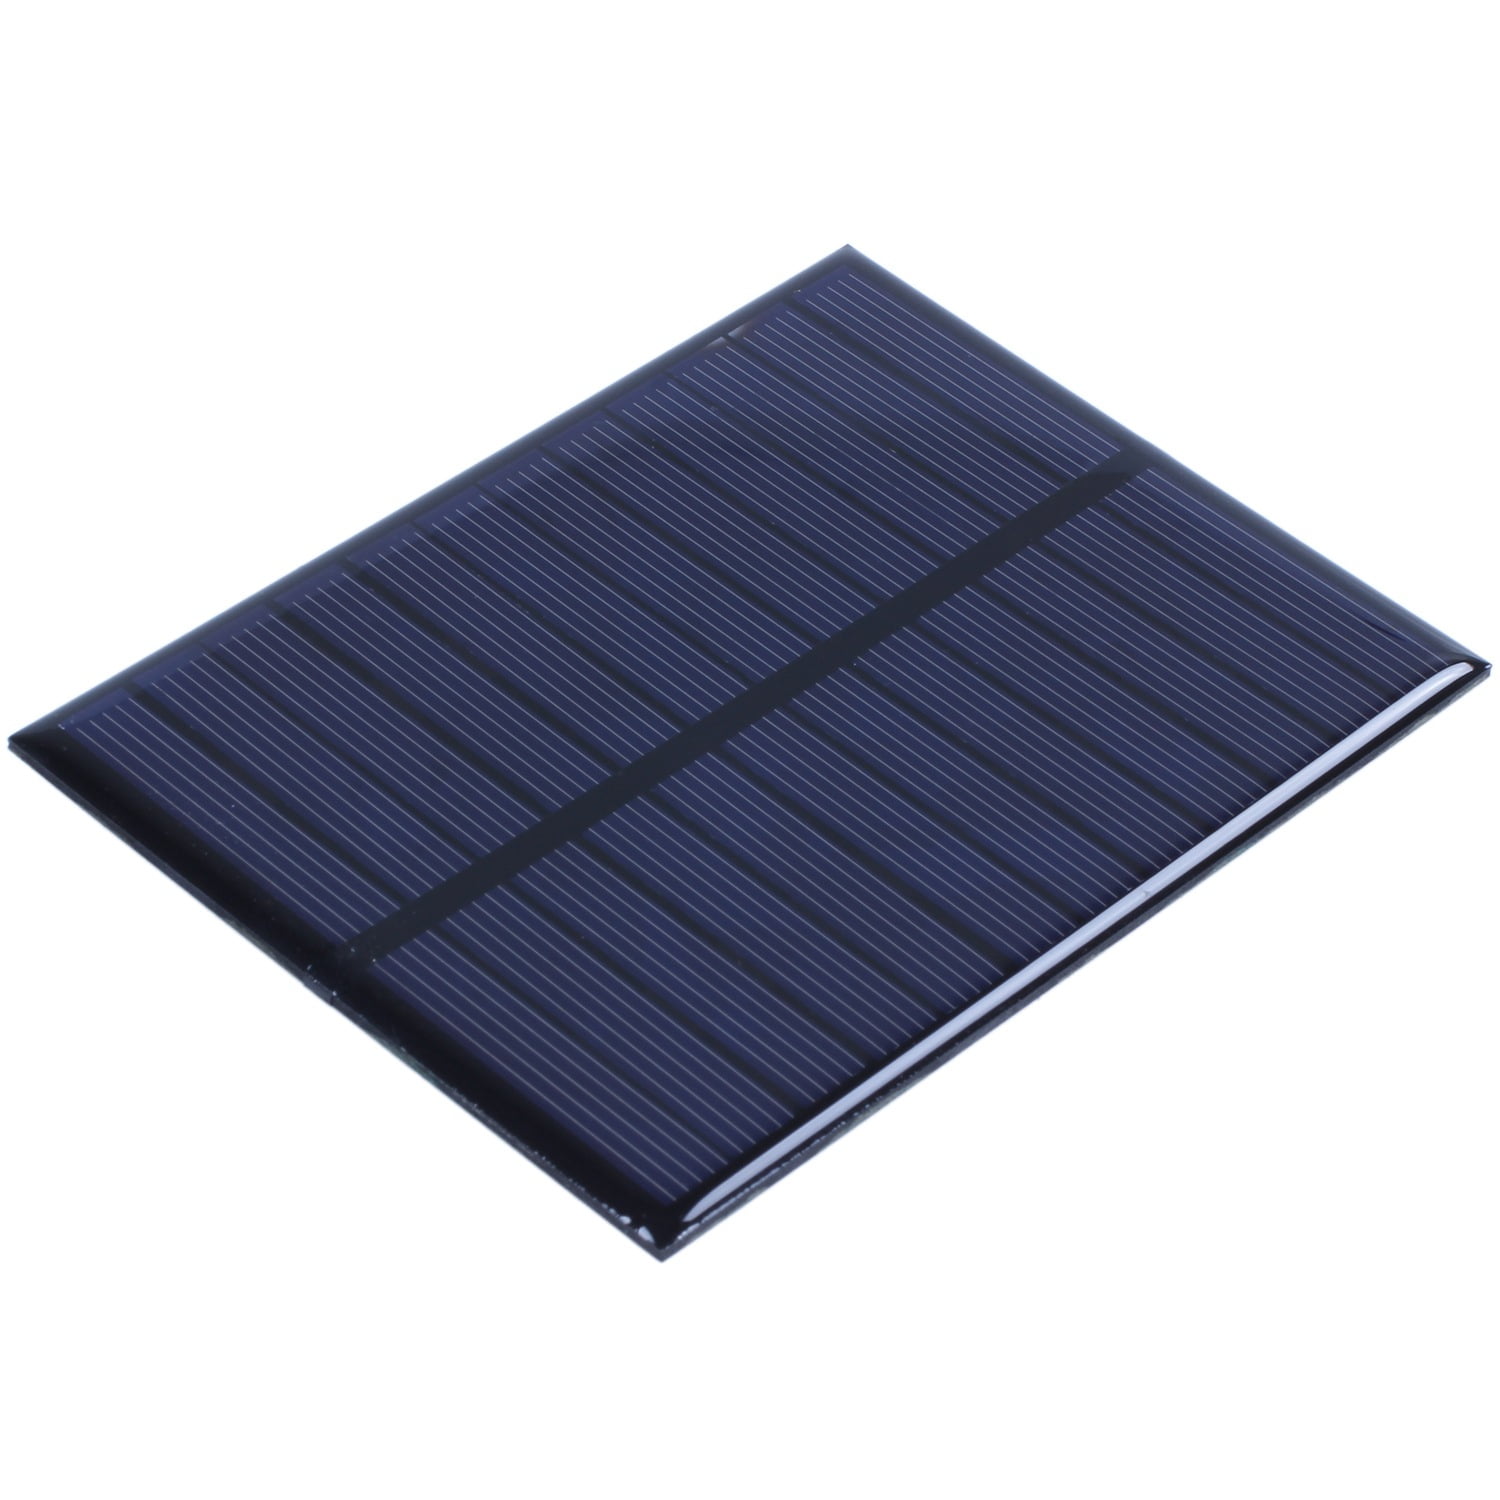 Mini Solar Panel Solar Cell Battery Charger Vehicle Car Toy Phone 5.5V 0.6W